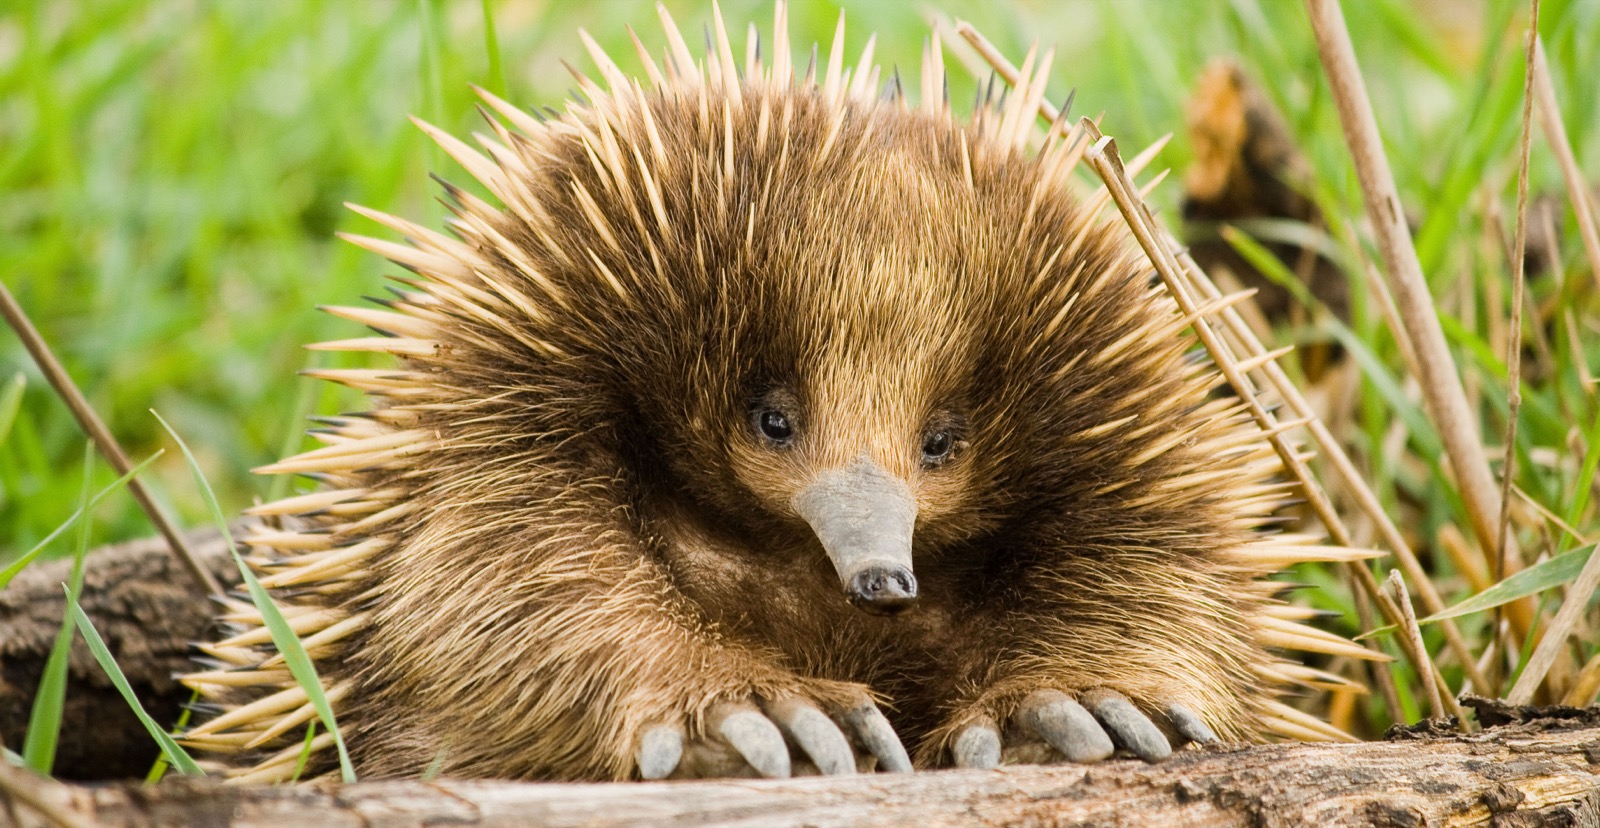 Cool Animals Echidna or spiny anteater